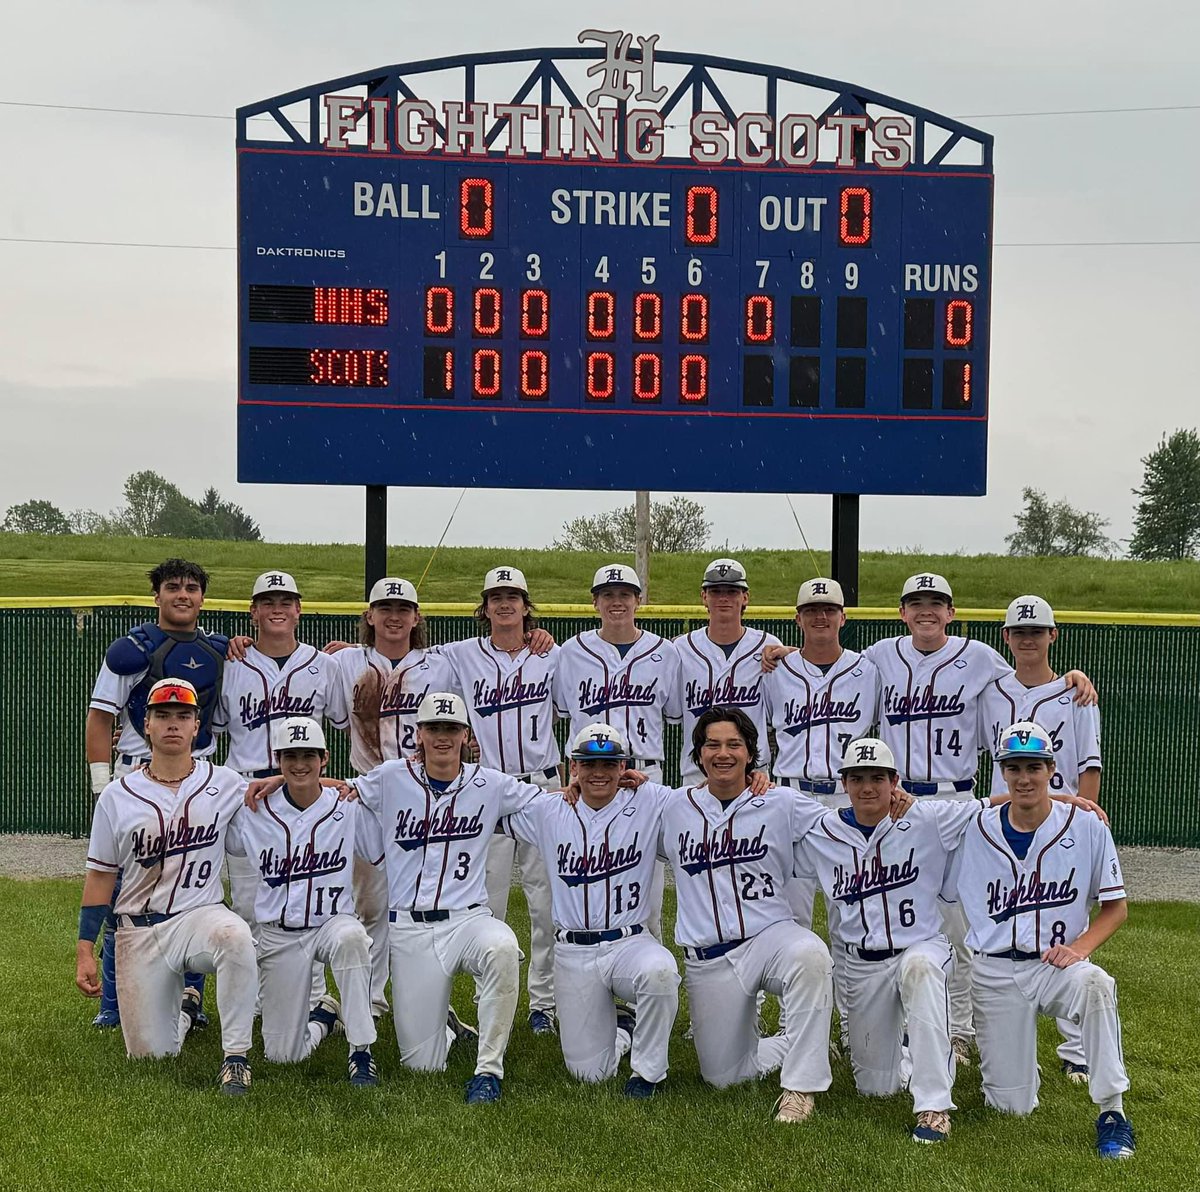 Congratulations to our Varsity @HHScotsBaseball team on their 1-0 victory over Harding tonight. The victory secures them an outright MOAC Title!  #GoScots @CBUSsportsLocal @McMotorsport @SportsMCS @swankonsports  @OHCDBCA @PrepBaseOHScout